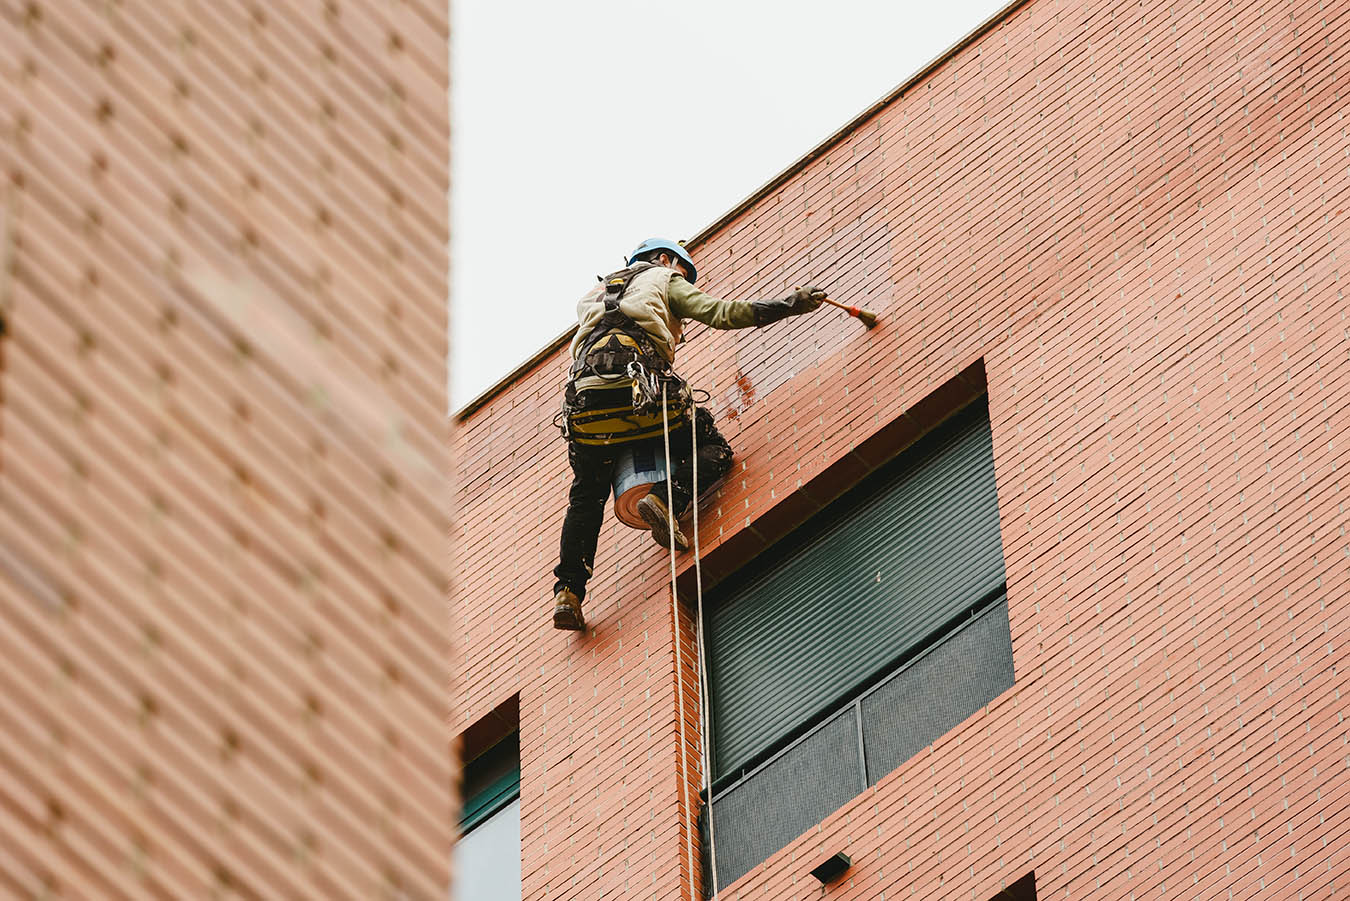 Painter perched hanging on the walls of a building with ropes.; Shutterstock ID 1317672755; Purchase Order: -